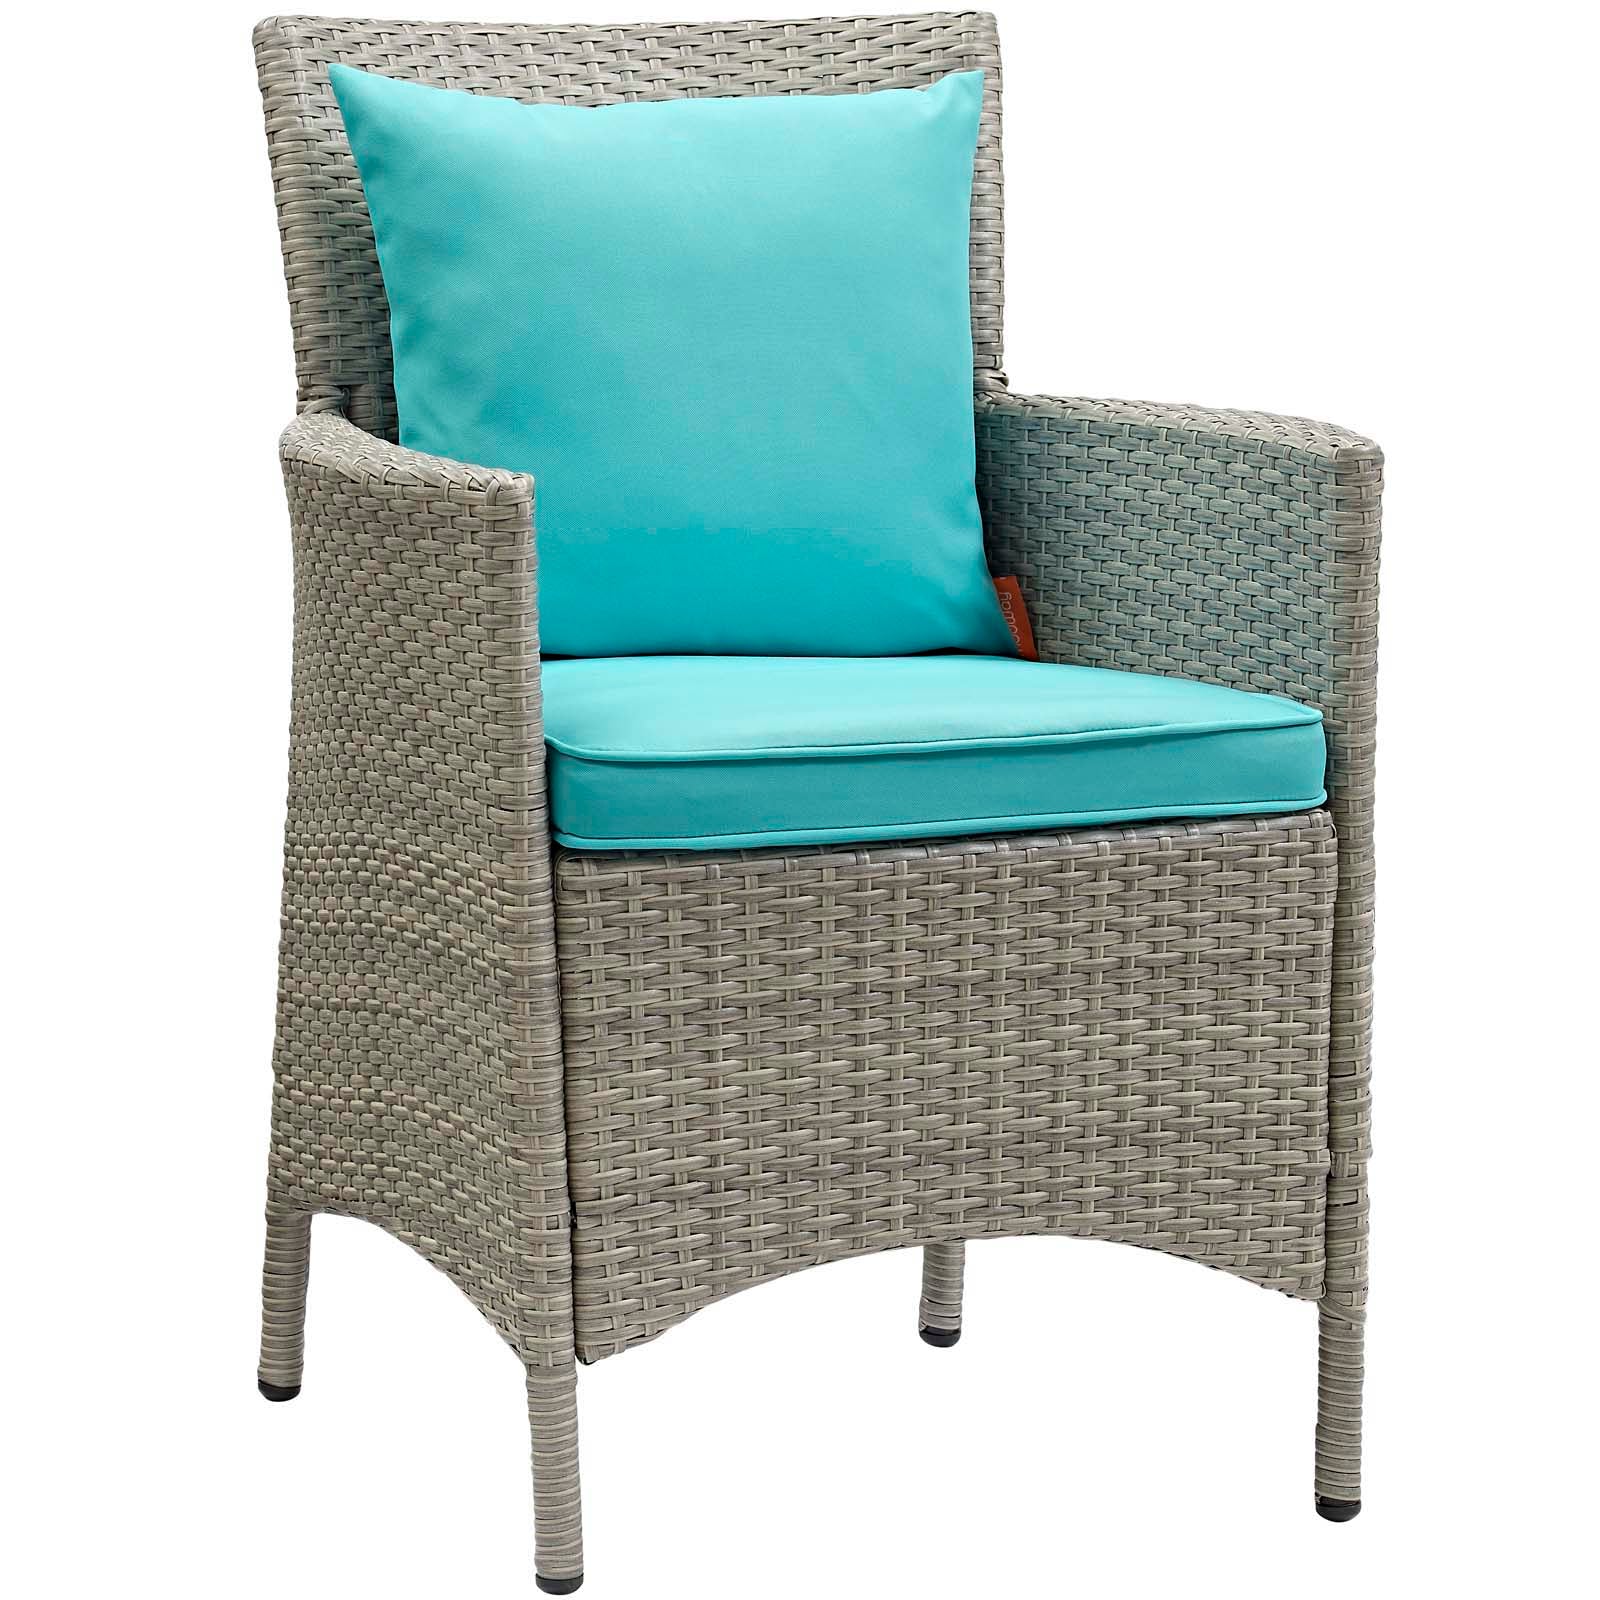 Modway Outdoor Dining Sets - Conduit 7 Piece Outdoor Patio Wicker Rattan Dining Set Light Gray Turquoise